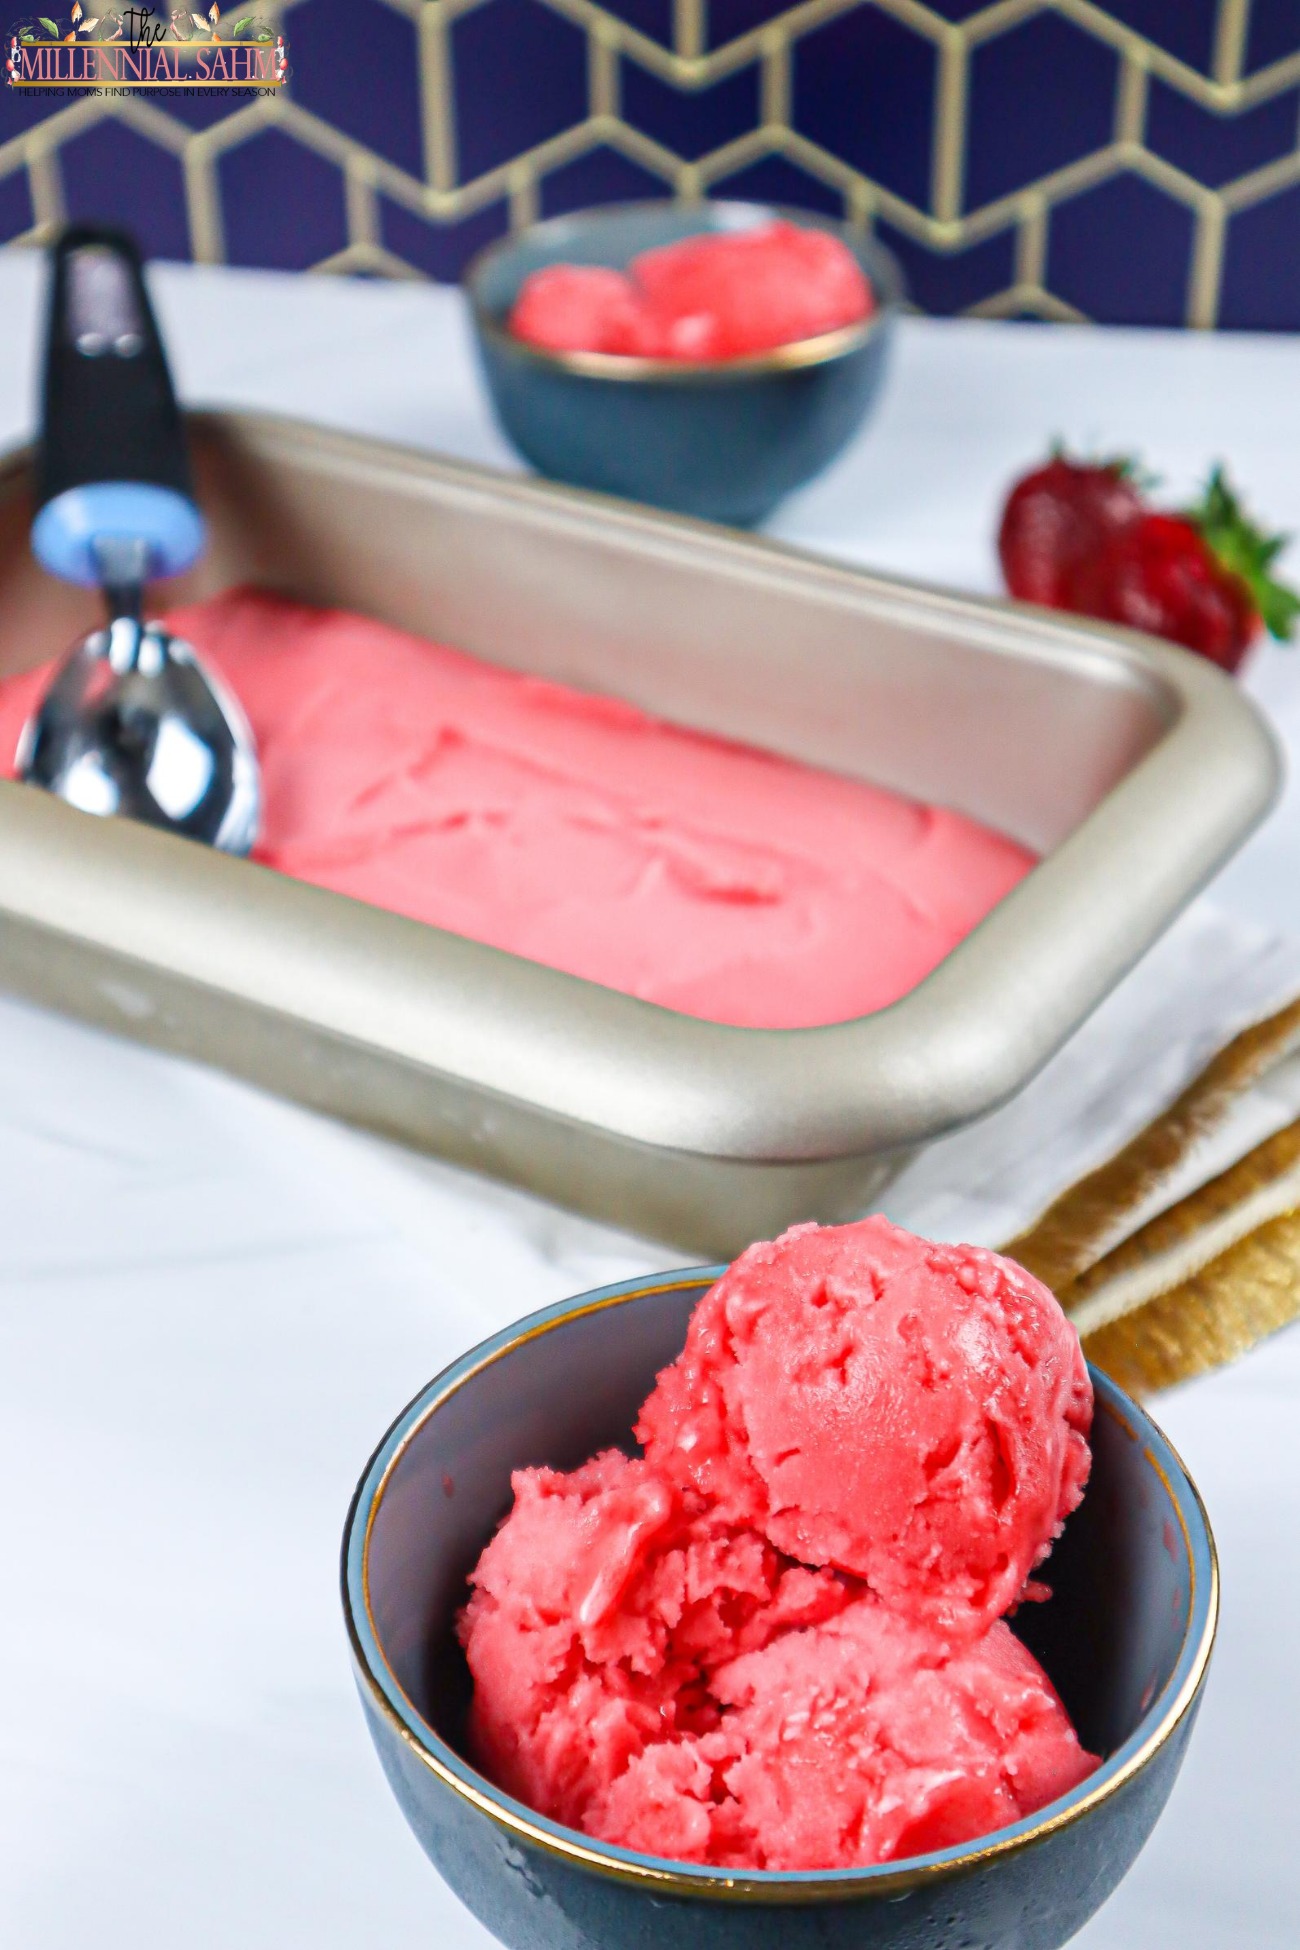 Looking for a guilt-free, sugar-free dessert to enjoy during these hot summer days? Look no further than this super easy Italian ice recipe featuring Sparkling Ice.